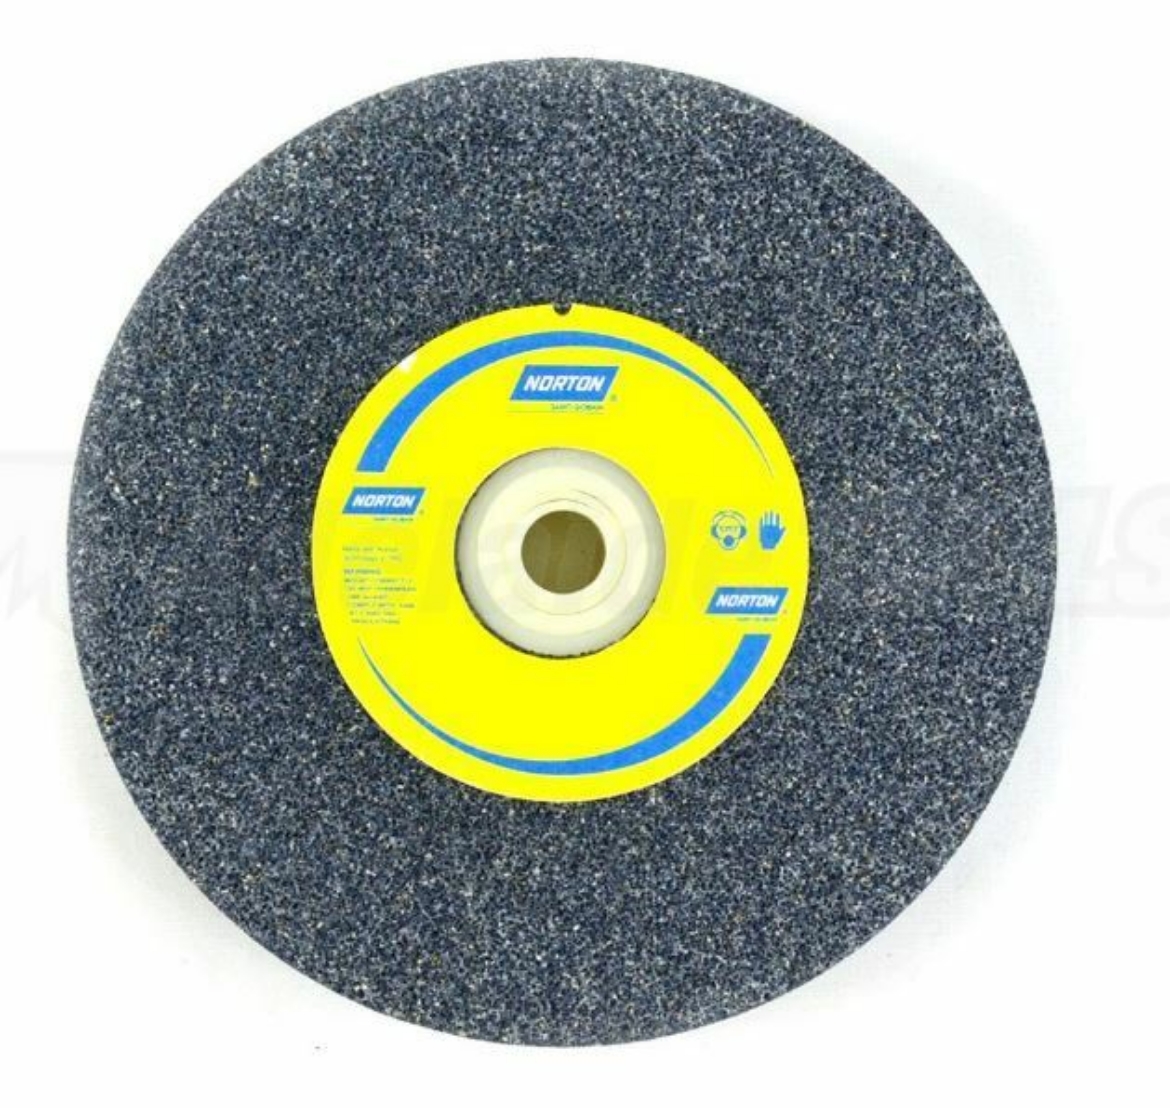 Picture of Norton Type 1 Grey Aluminium Oxide Straight Grinding Wheel - 200 X 25 X 31.75mm - 46 Grit